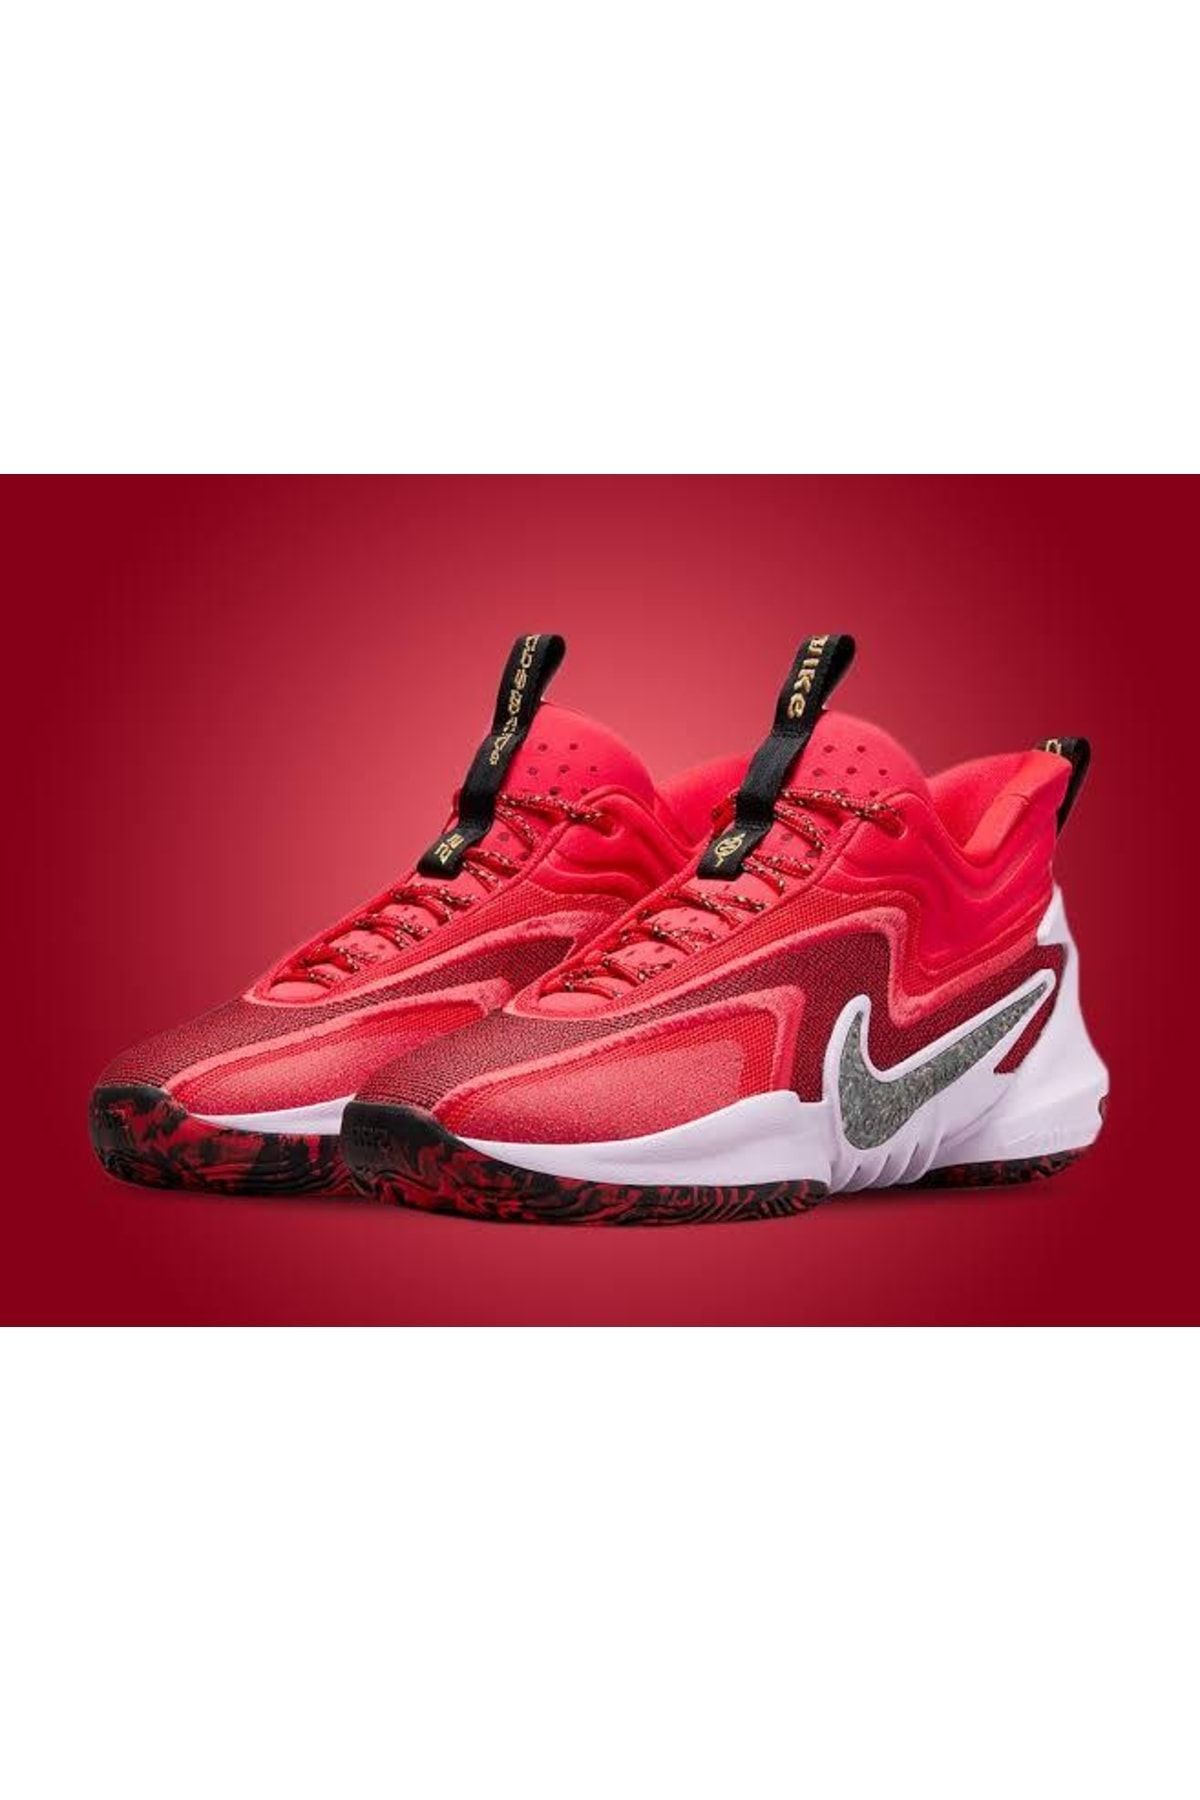 Nike Cosmic Unity 2 Basketball Shoes Red Dh1537-601 Us Men